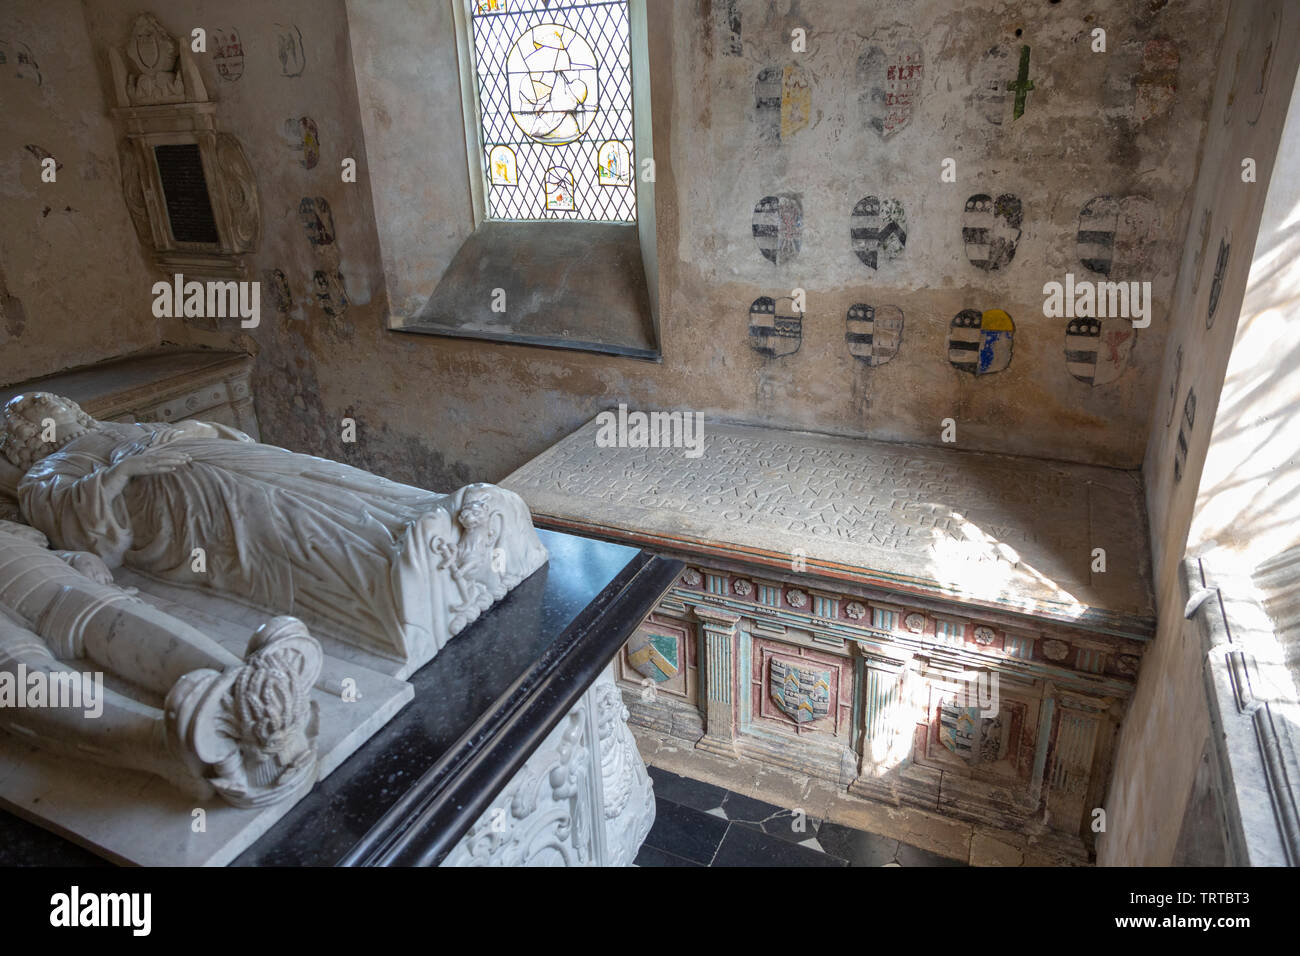 Farleigh Hungerford castle, Somerset, England, UK Hungerford tombes familiales dans la chapelle nord Banque D'Images